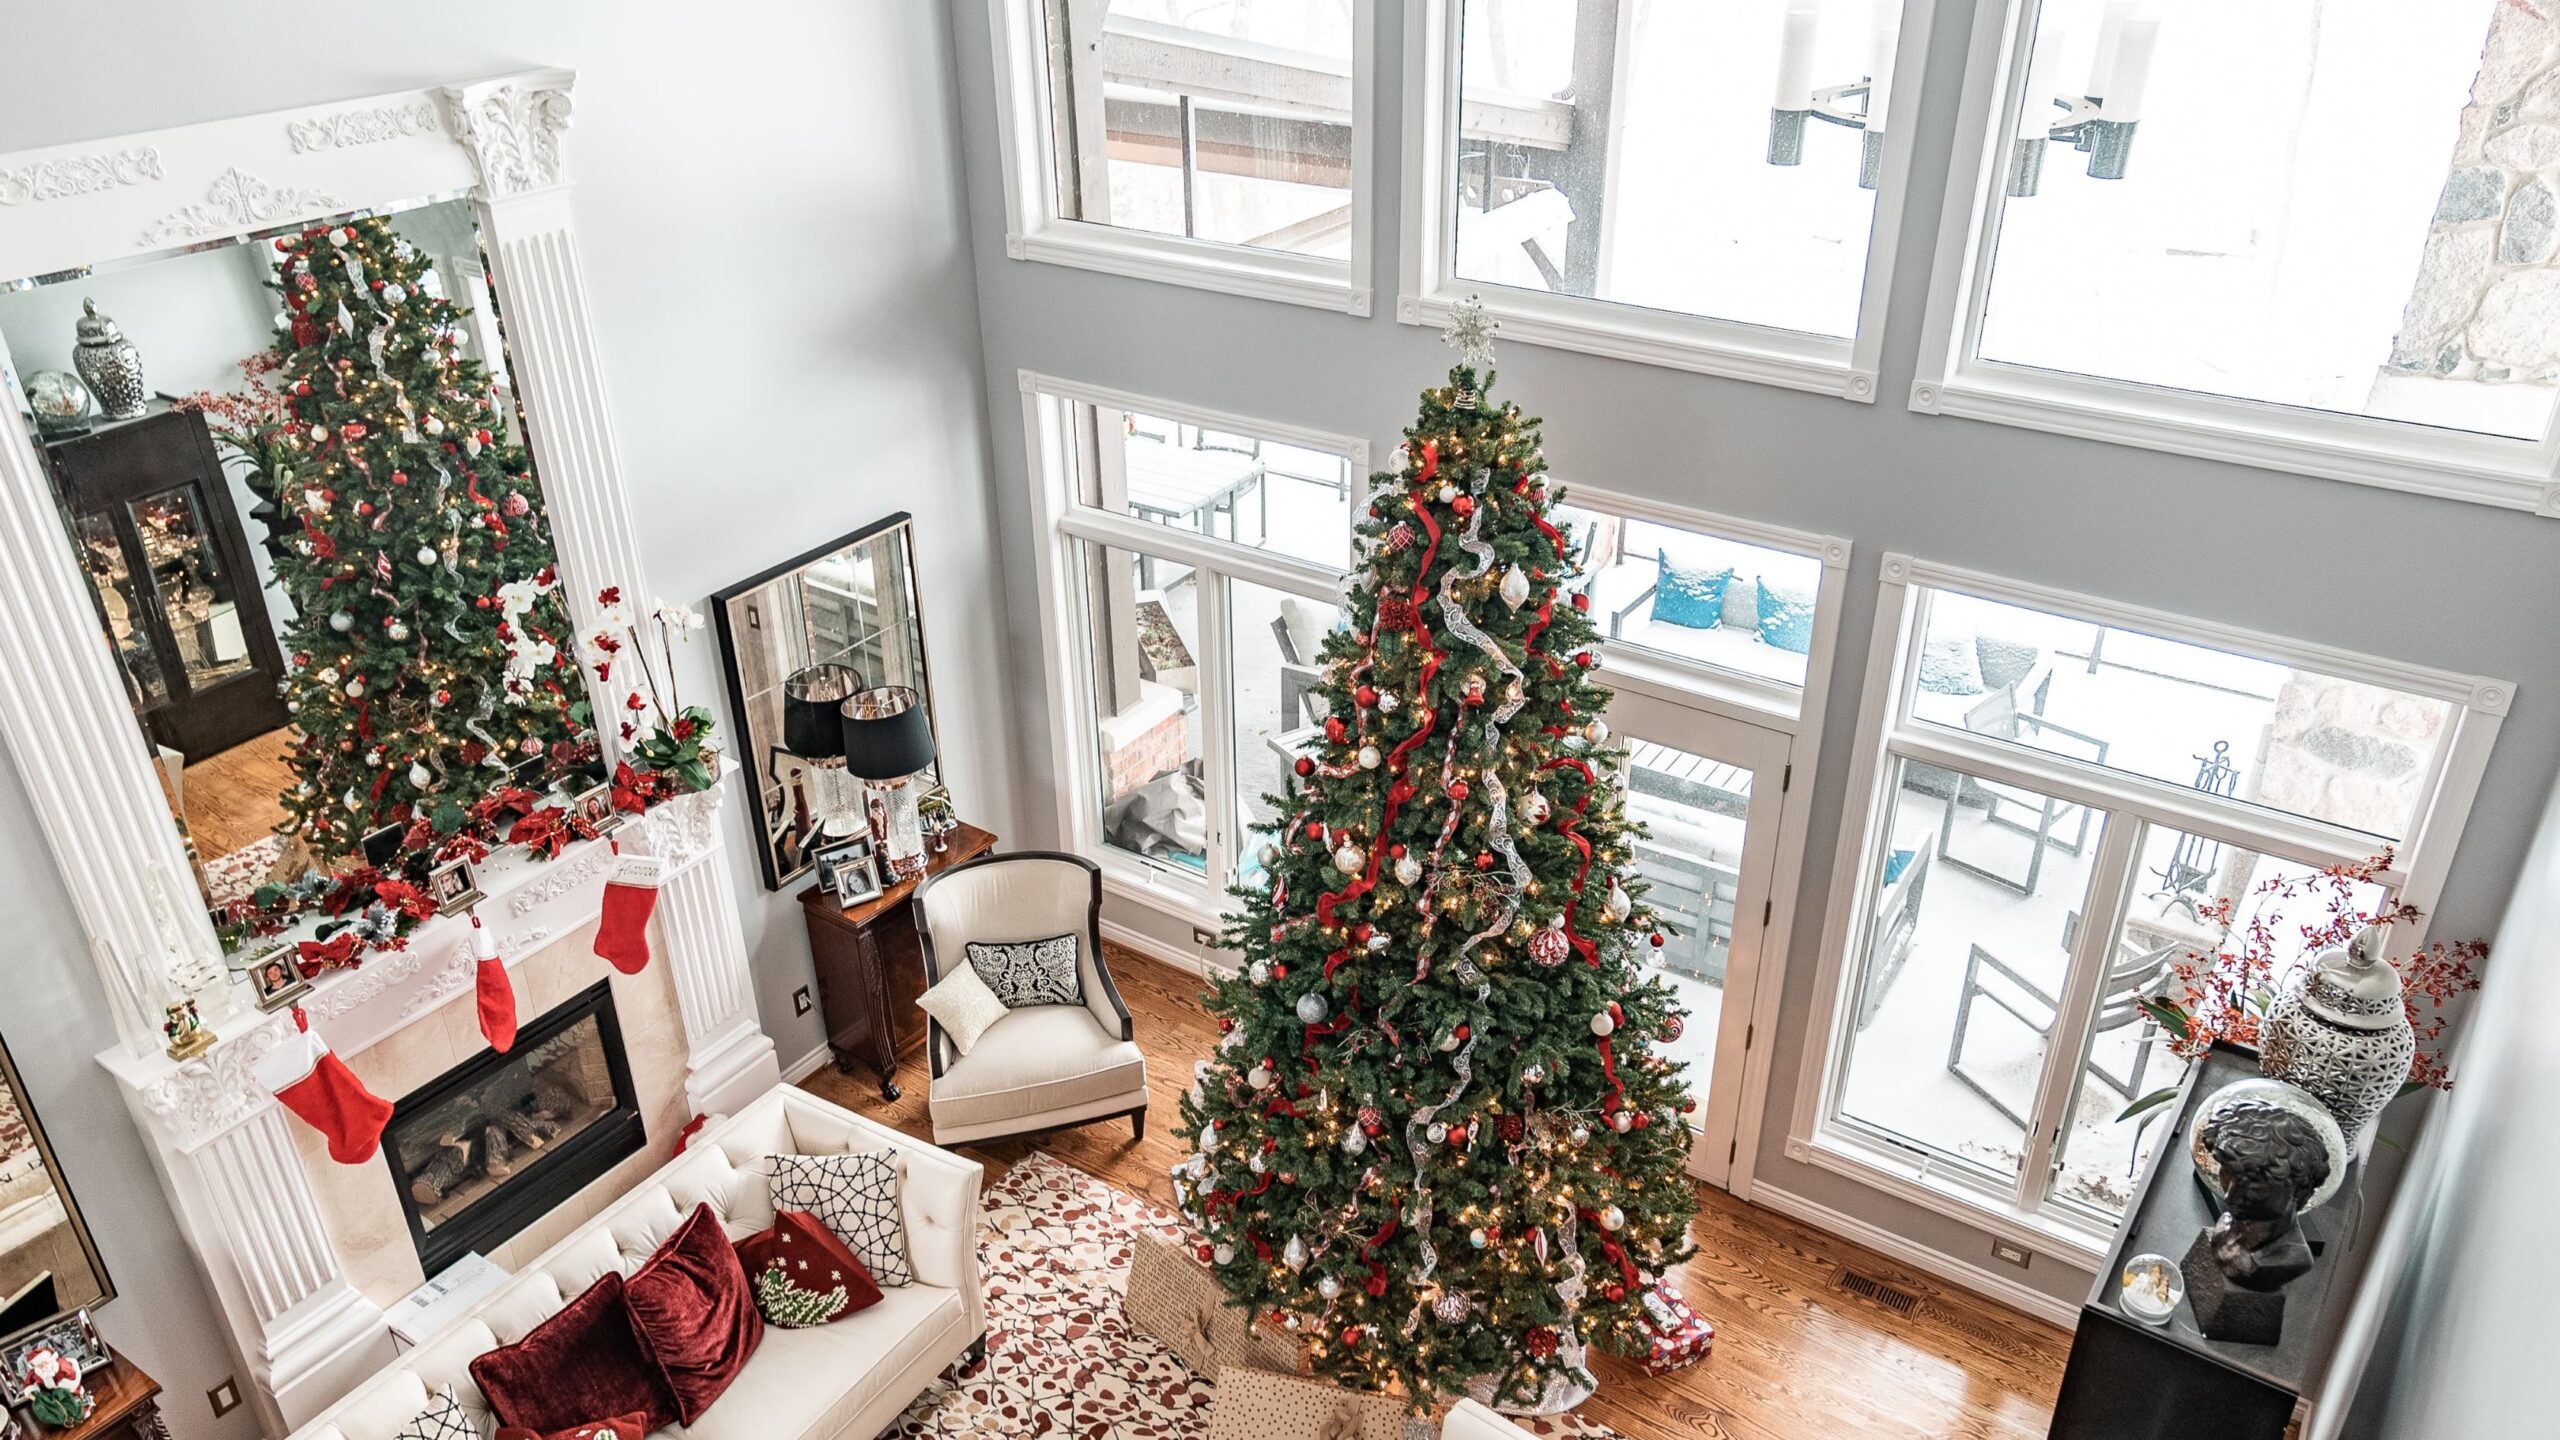 Featured image for “The Perfect Home Gift Might Be A Window Film Retrofit To Existing Glass”